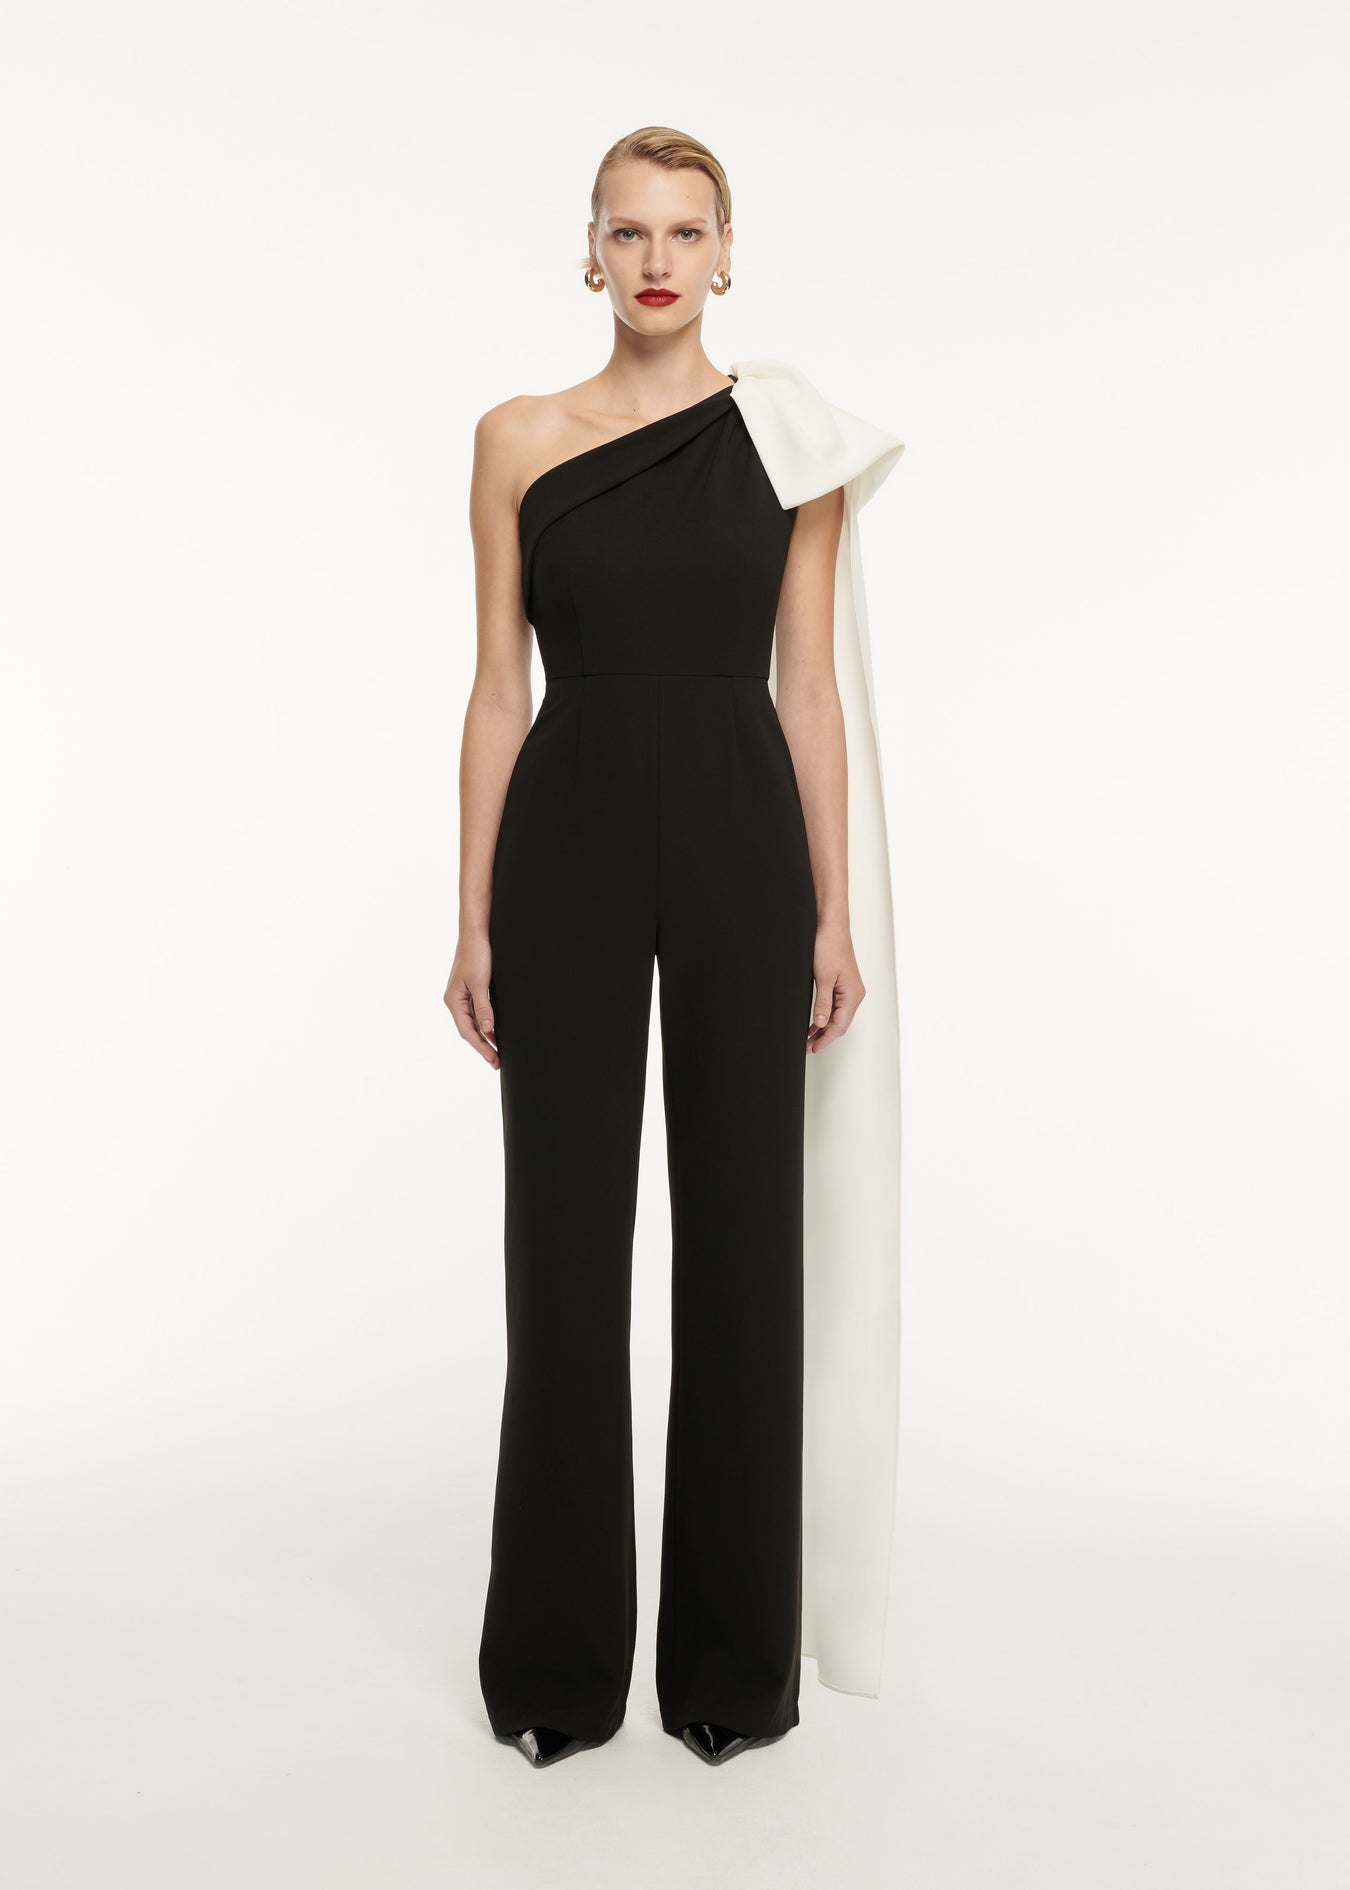 A woman wearing the Asymmetric Stretch Cady Jumpsuit in Monochrome